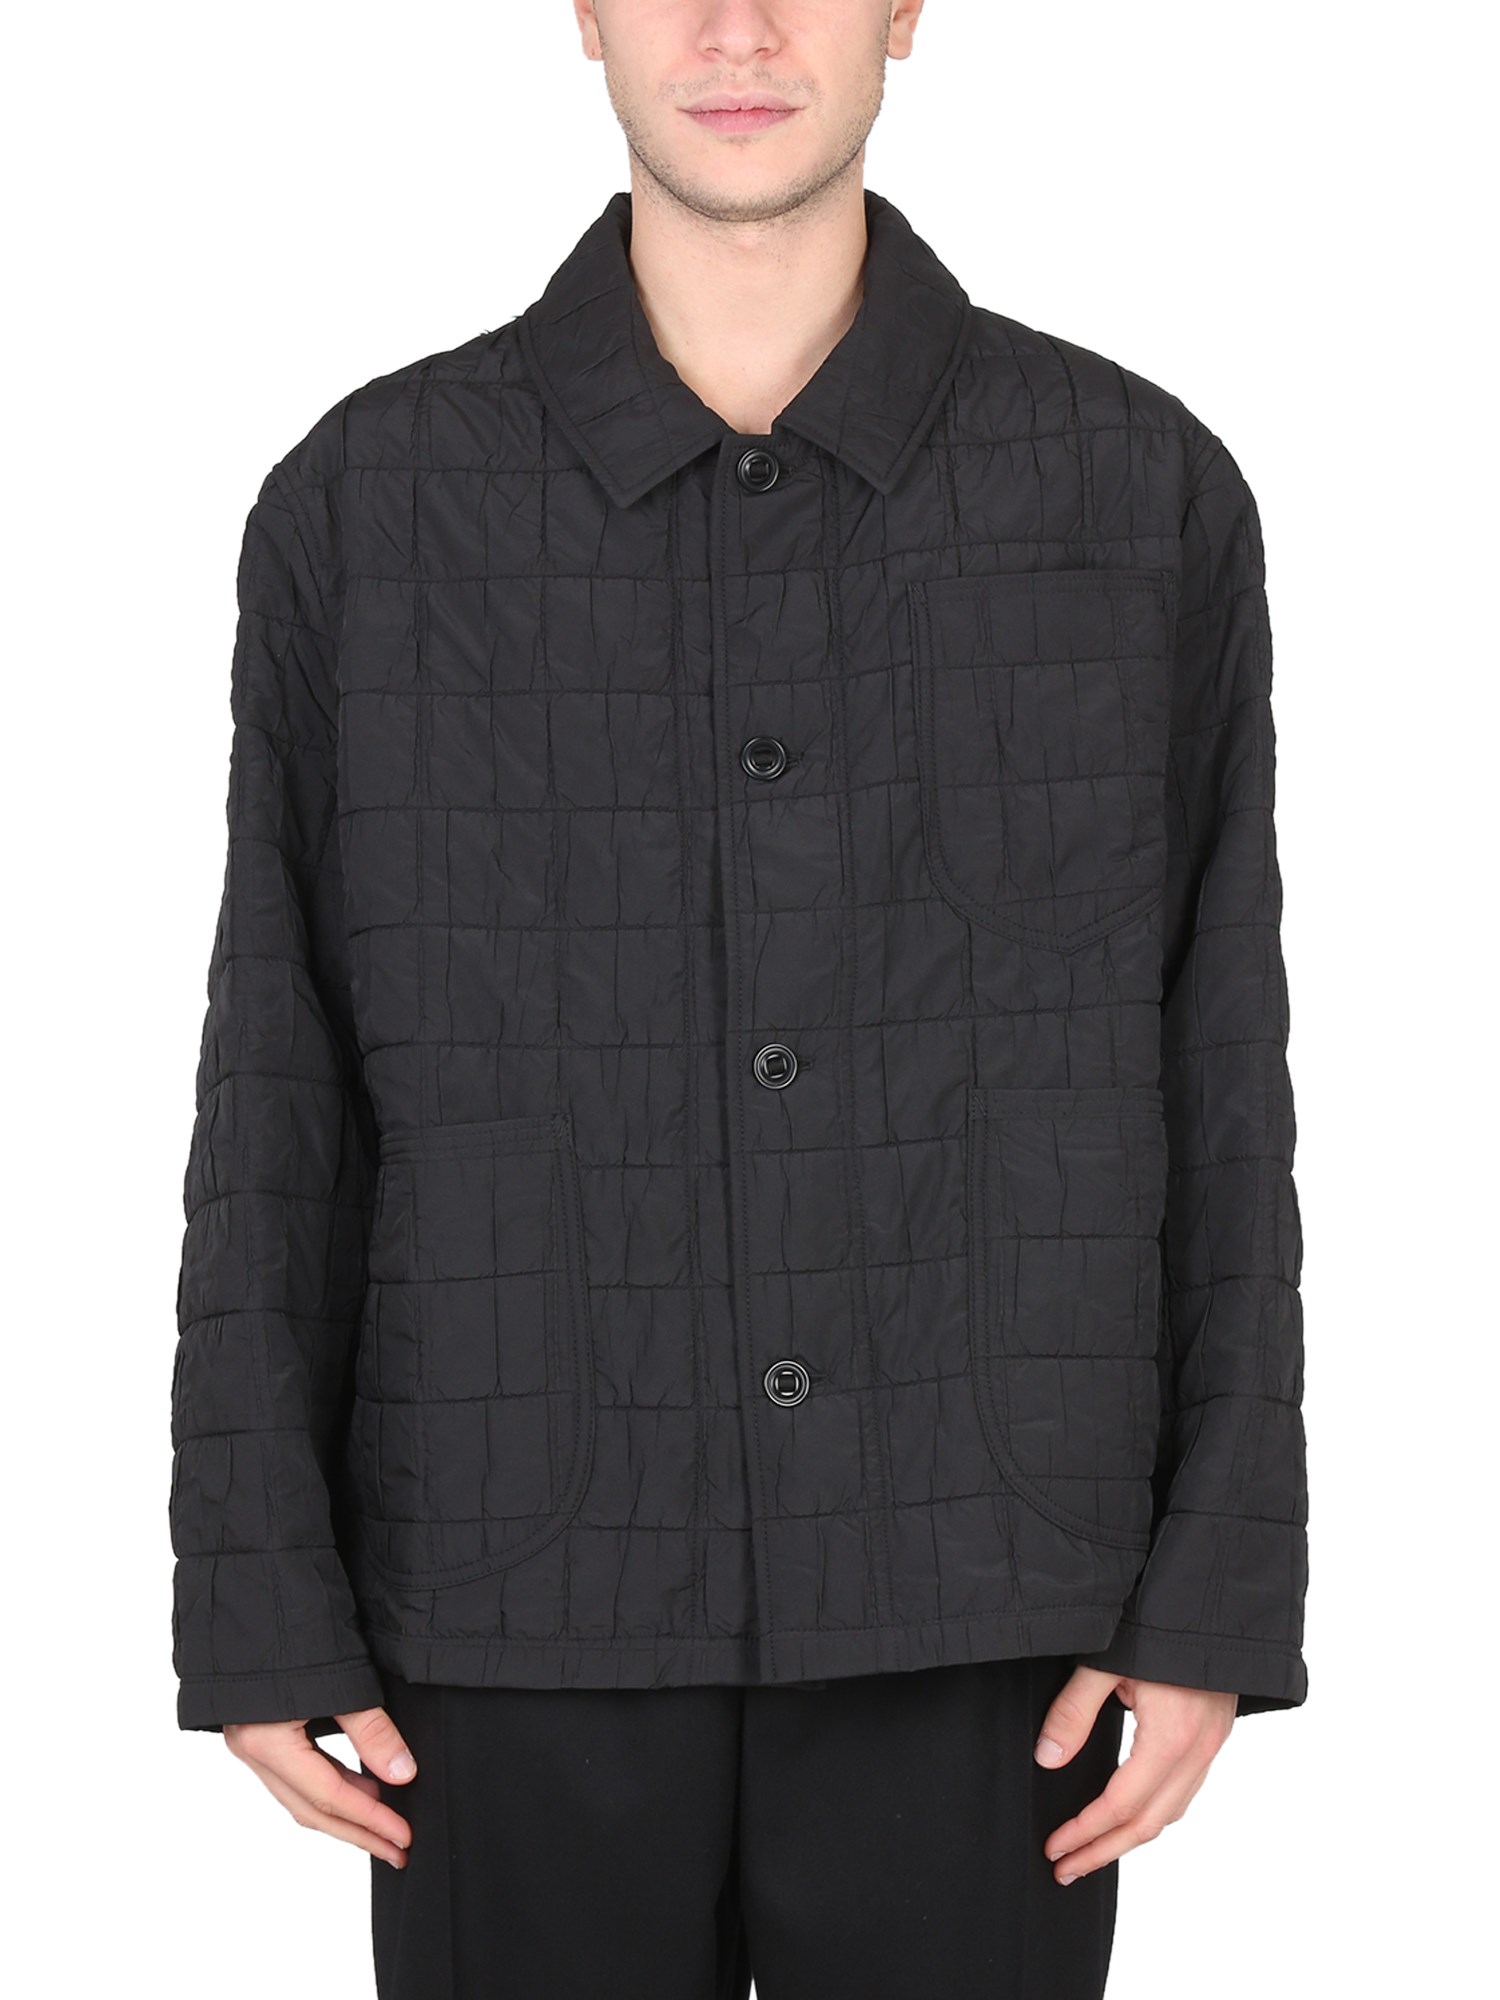 ymc labor quilted jacket